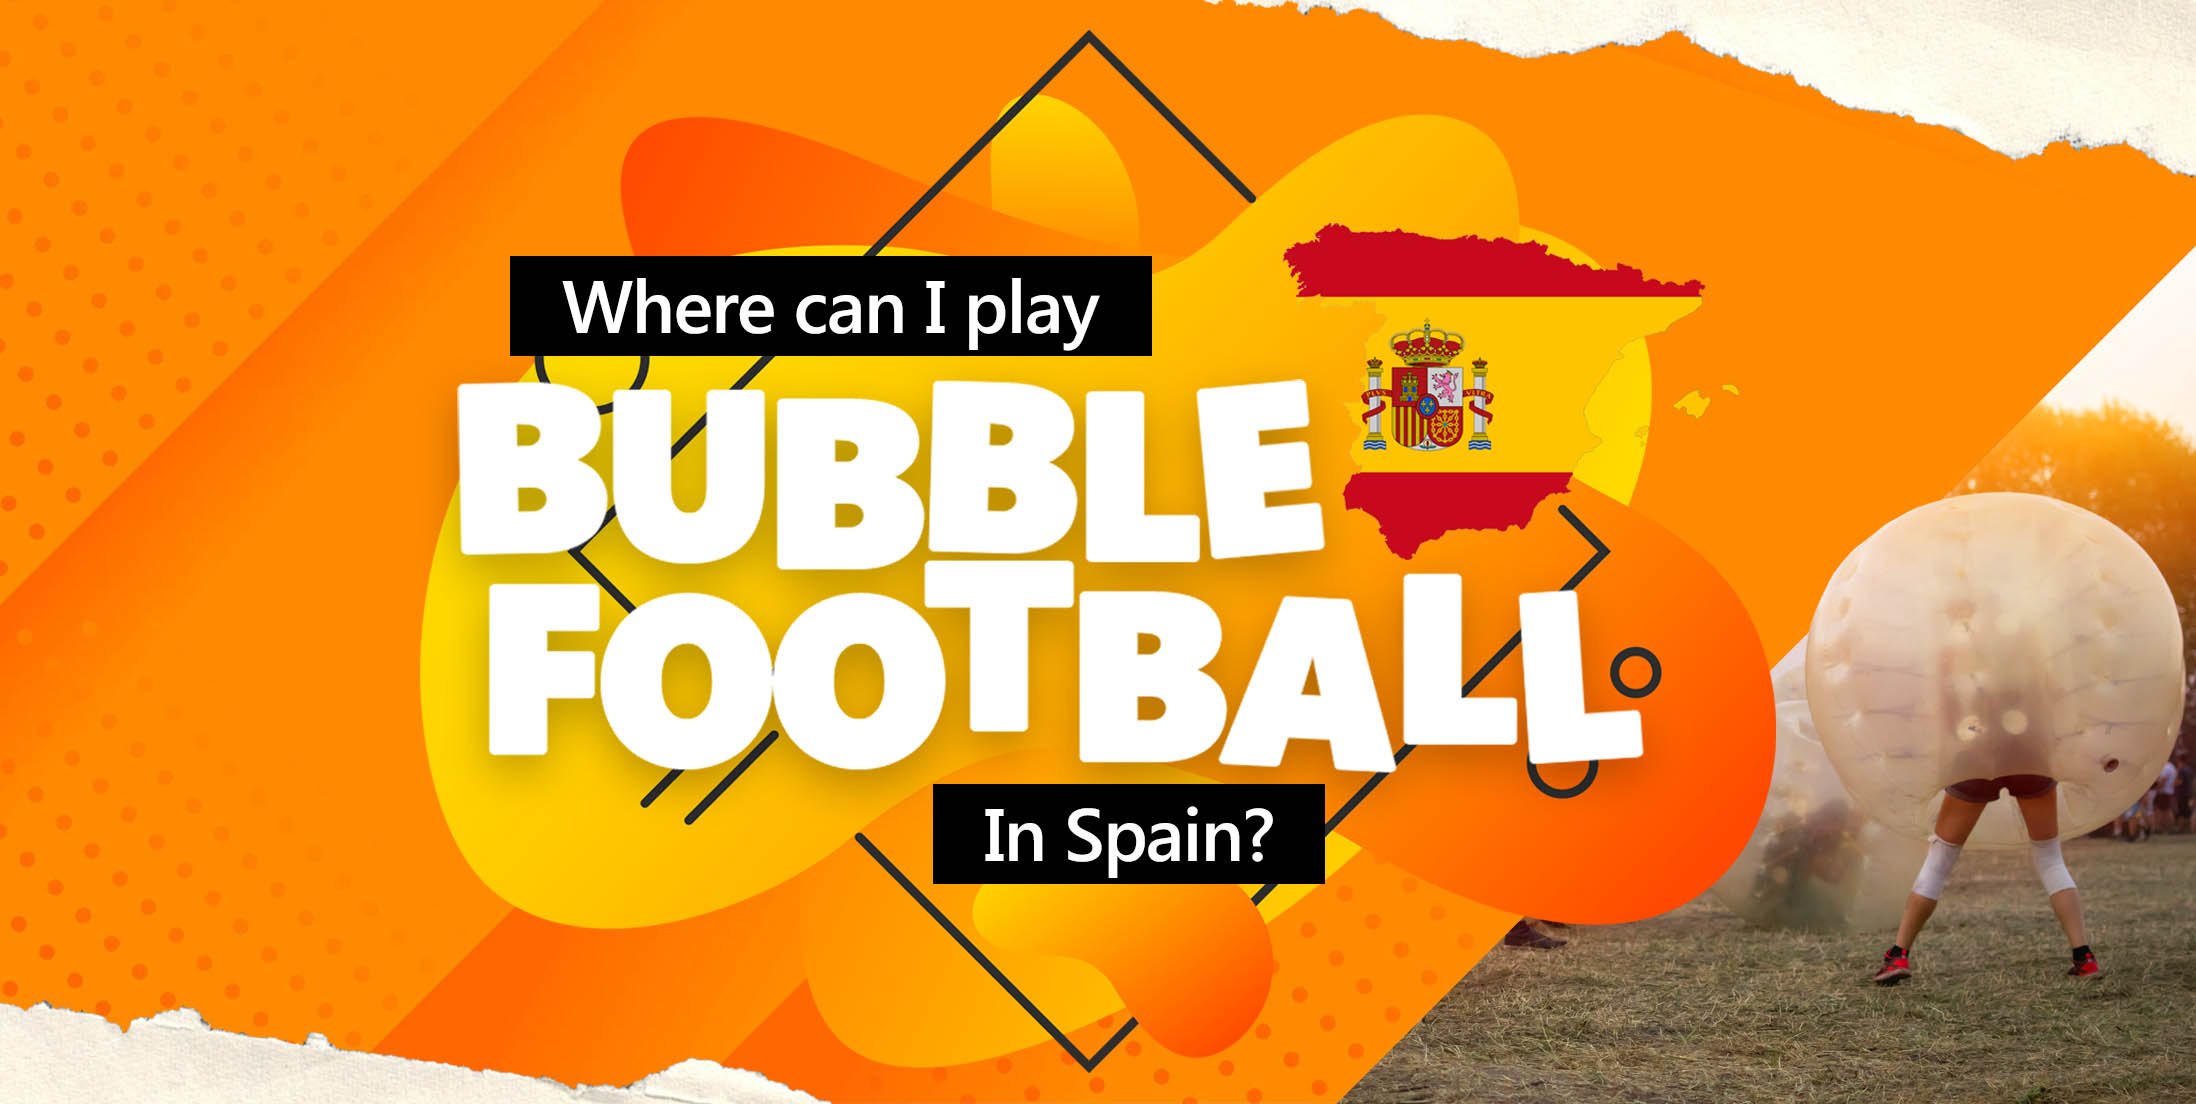 Where can I play Bubble Football in Spain?